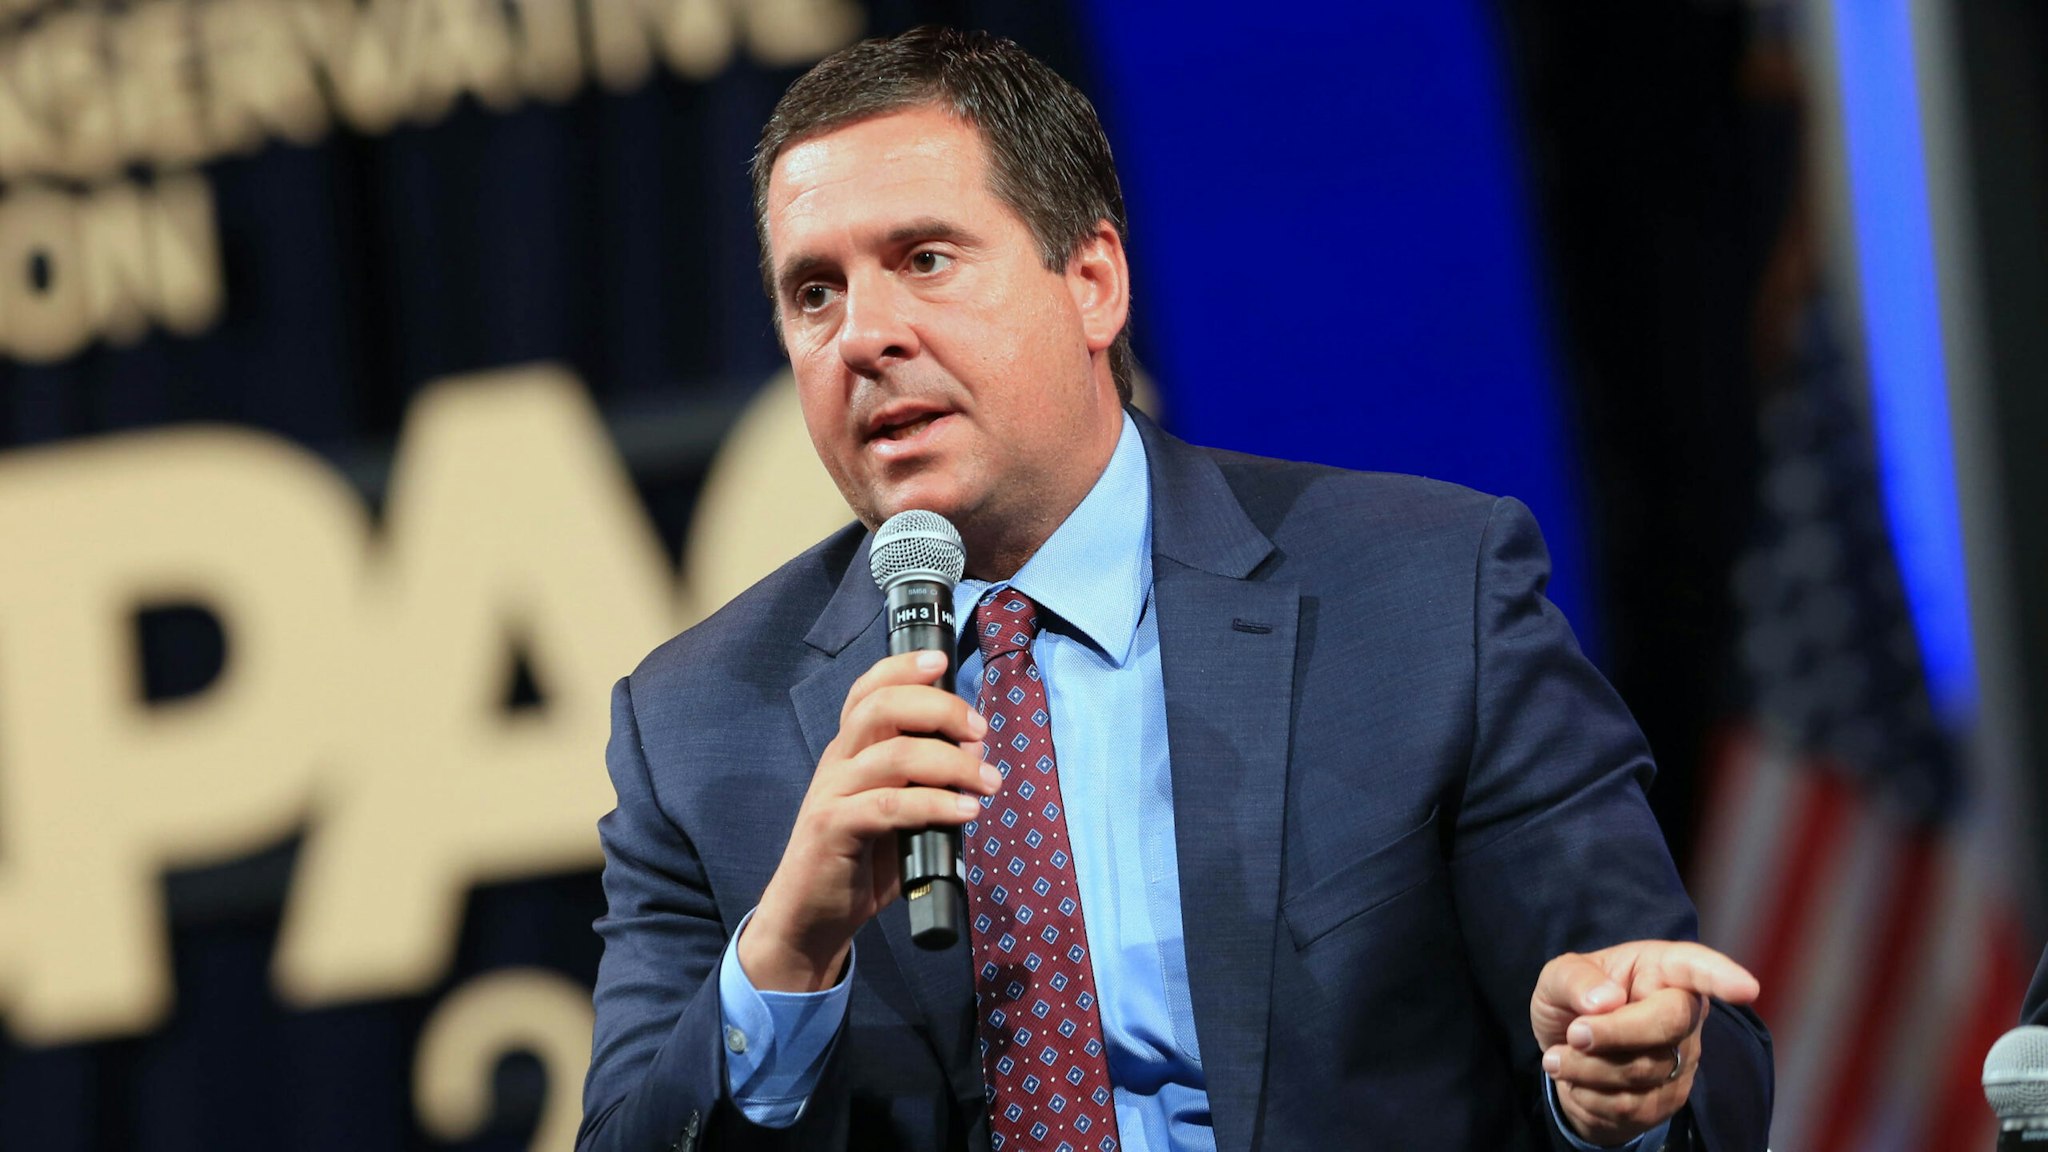 Representative Devin Nunes, a Republican from California, speaks during the Conservative Political Action Conference (CPAC) in Dallas, Texas, U.S., on Sunday, July 11, 2021. The three-day conference is titled "America UnCanceled."